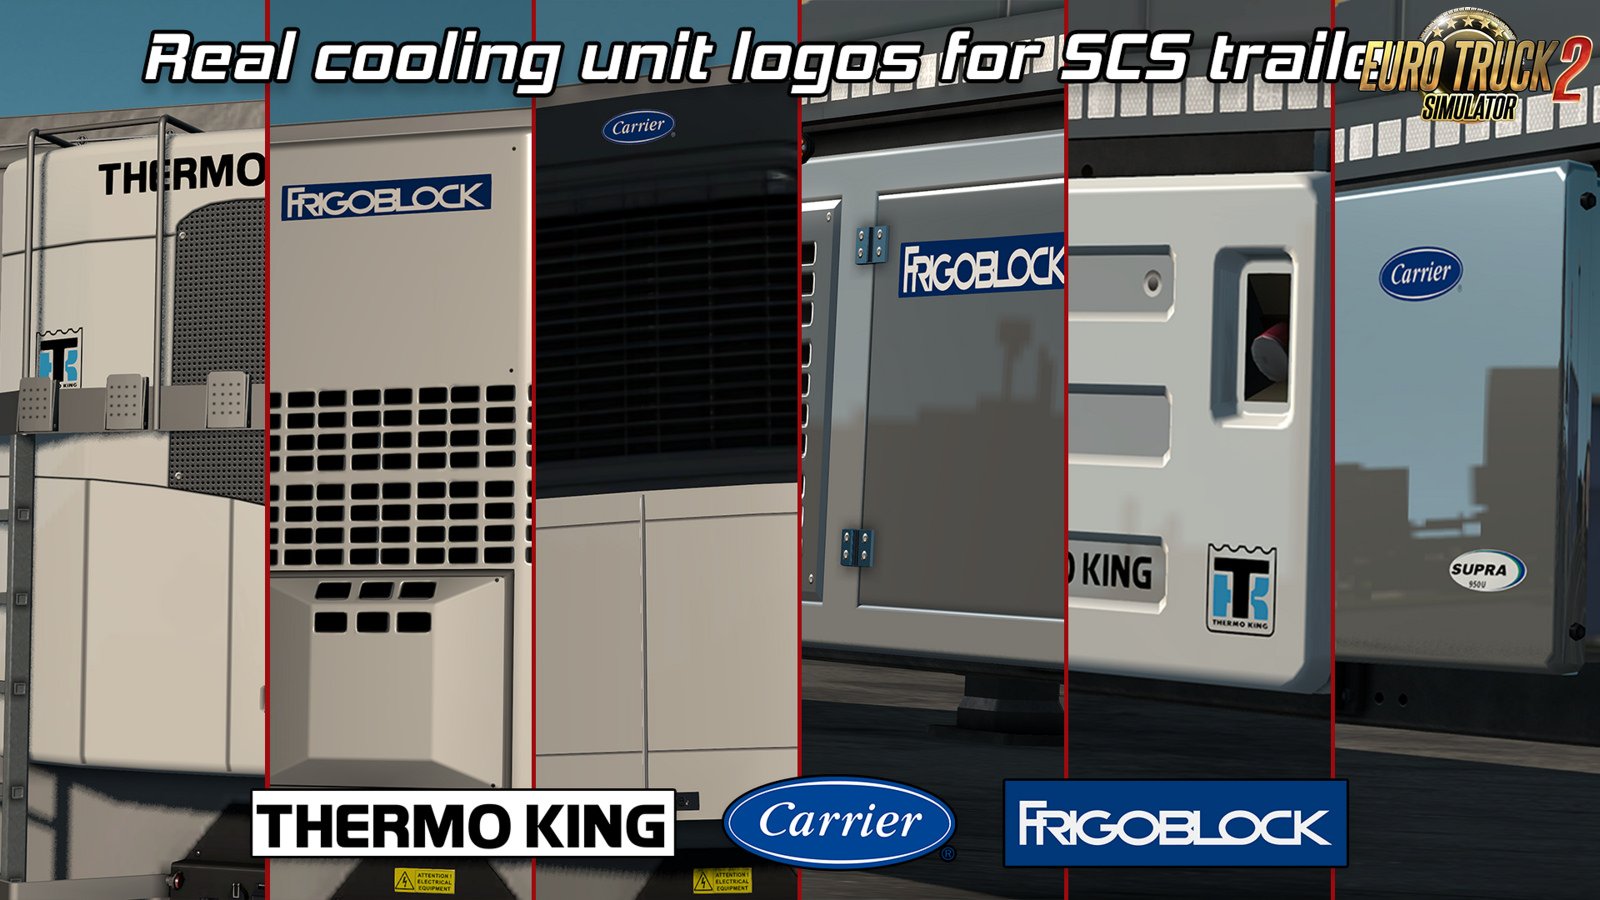 Carrier Thermo King. Холодильники Thermoking. Real Cooling Unit names. Thermo King Rd-1.